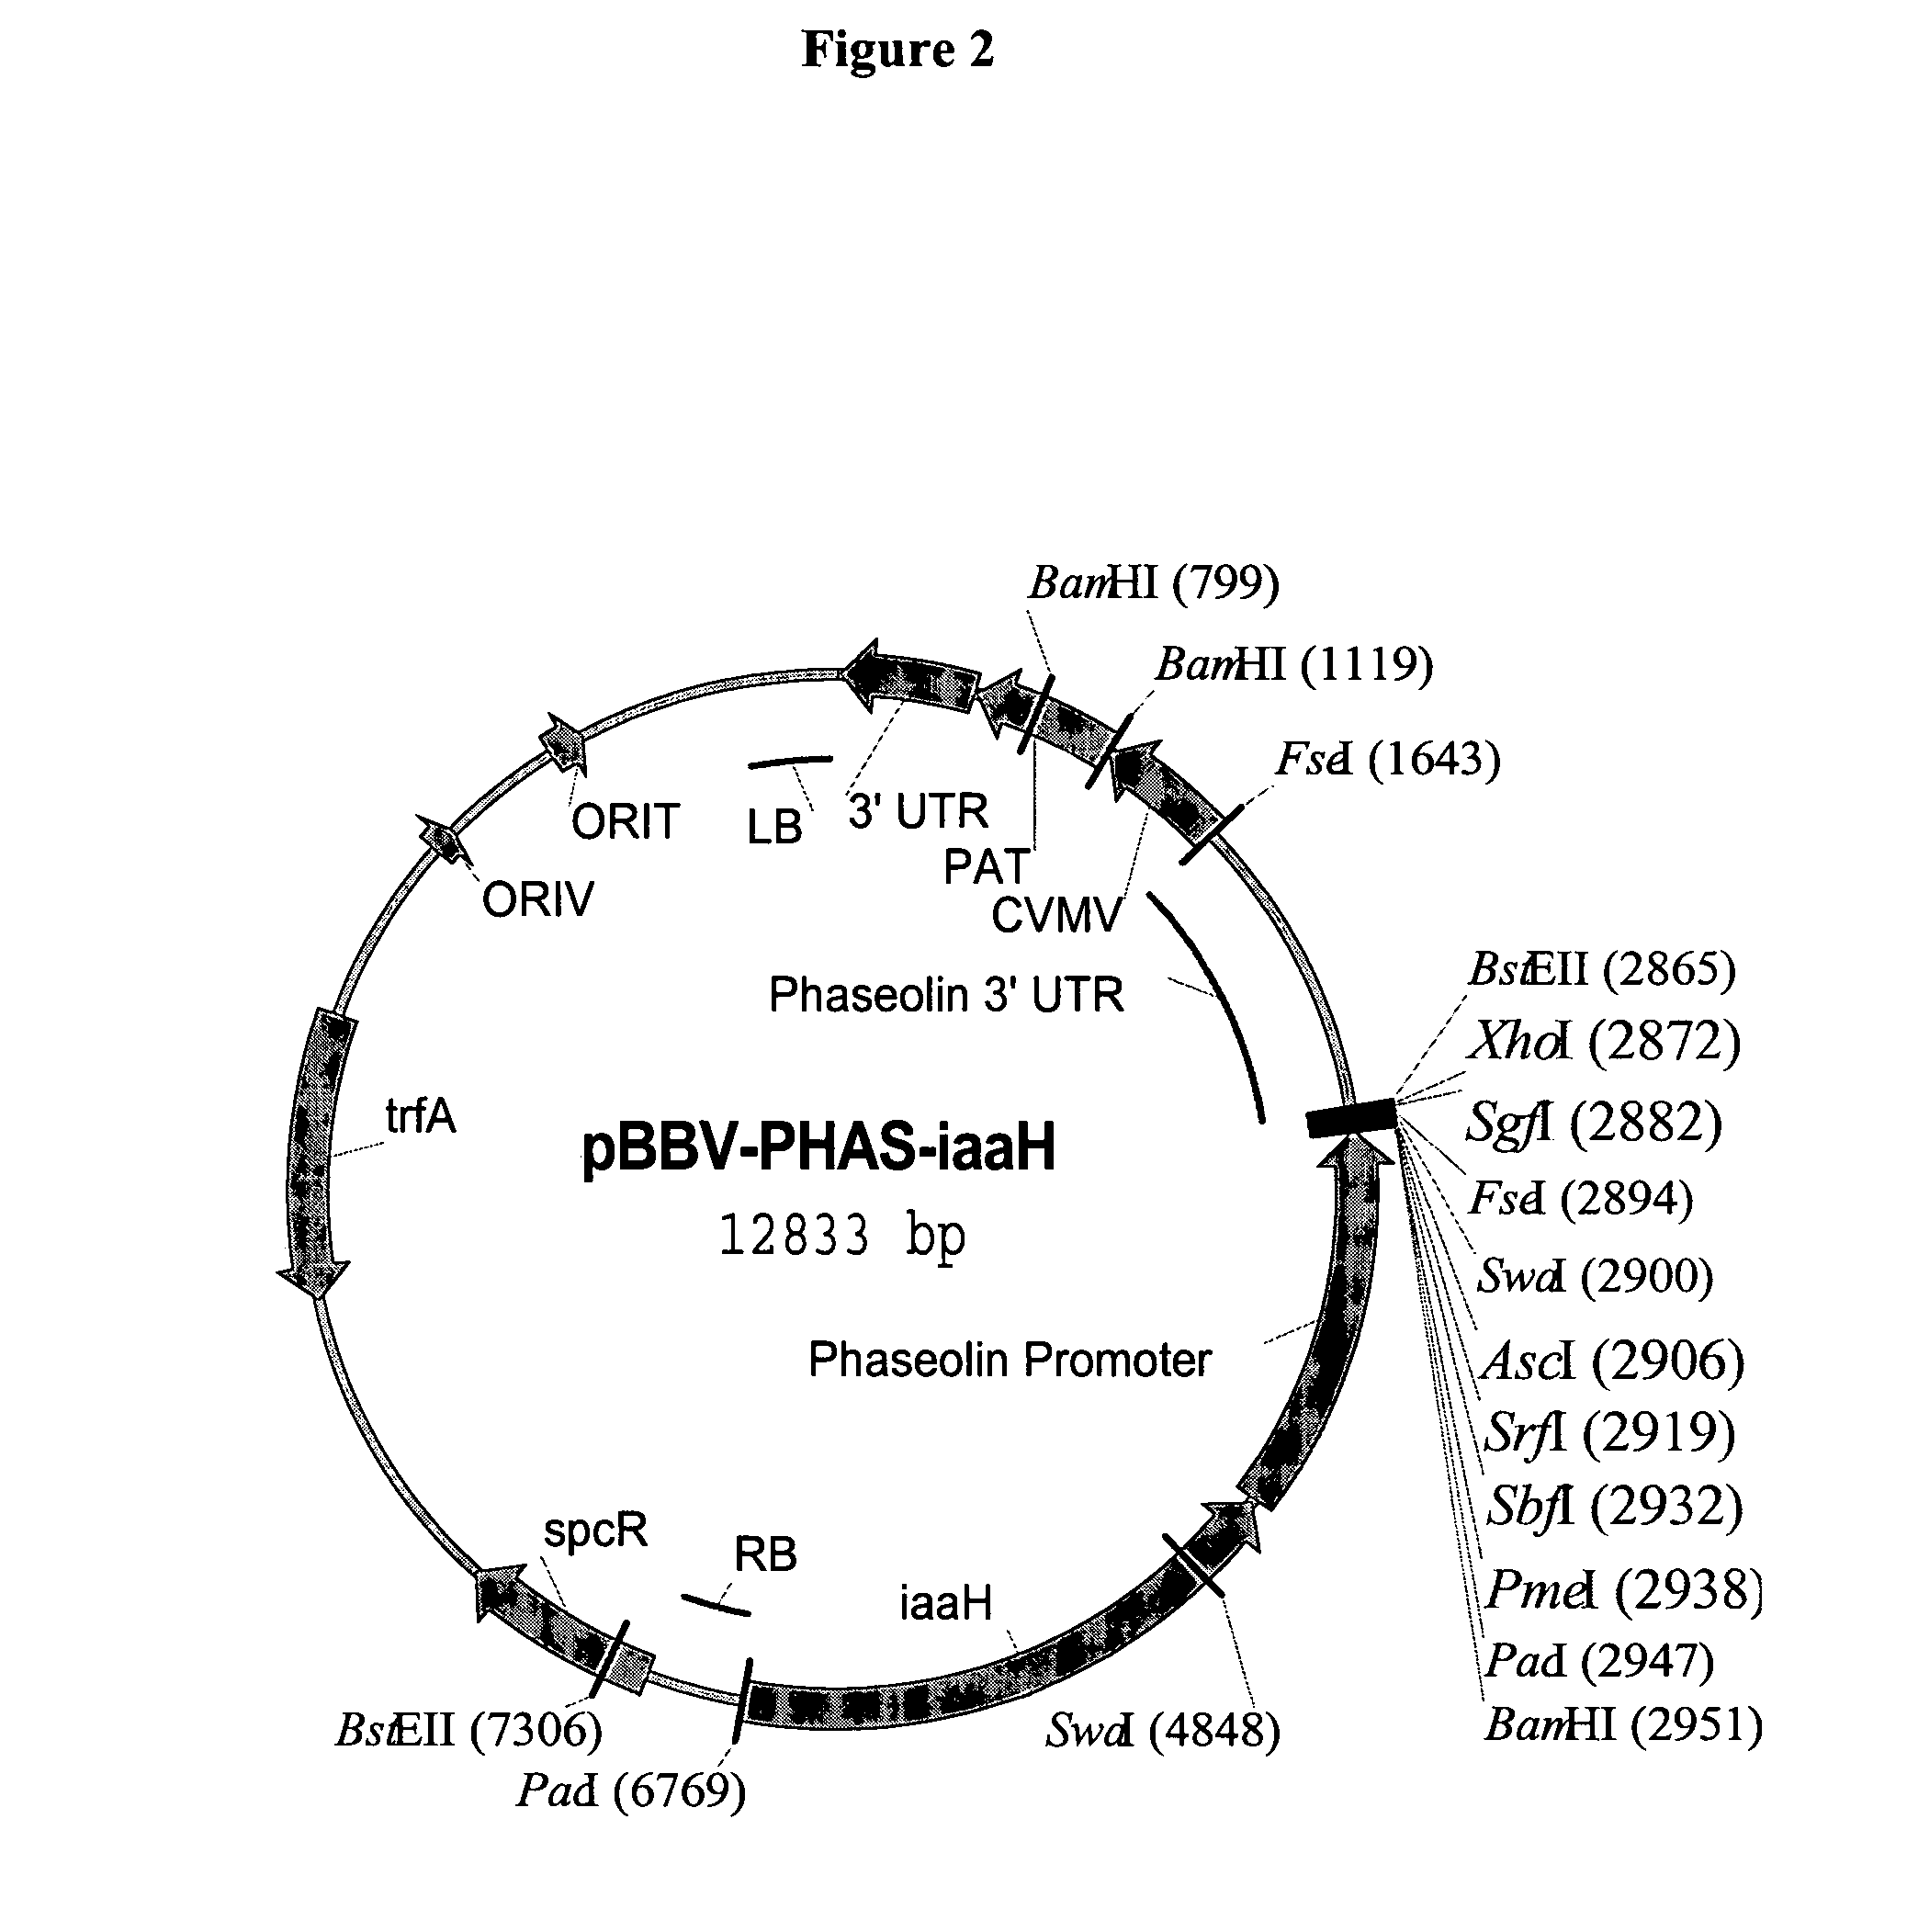 Vectors and cells for preparing immunoprotective compositions derived from transgenic plants